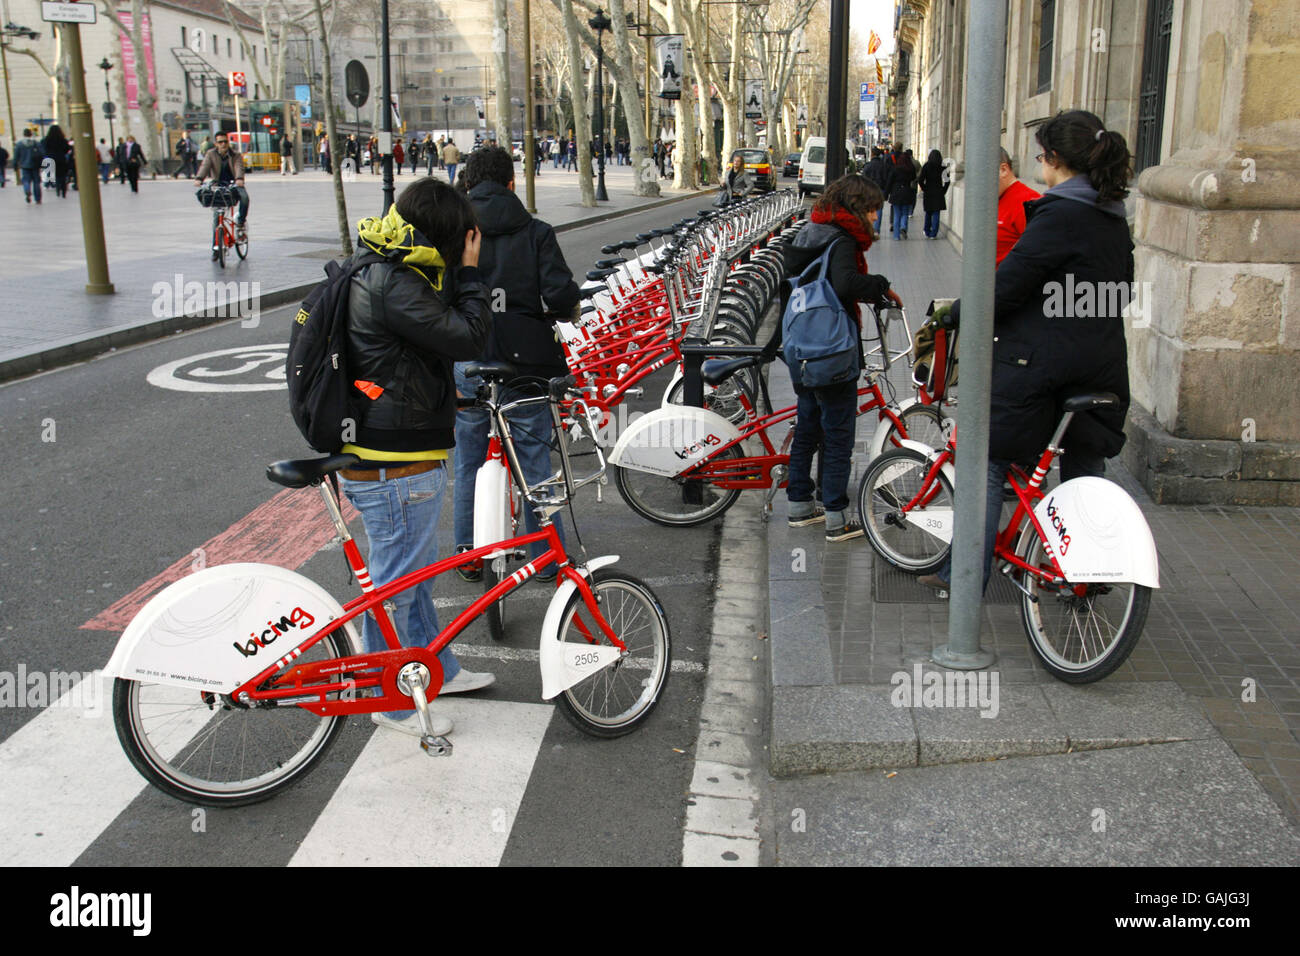 People in Barcelona, Spain, using hired bicycles to get about the city. The new scheme called Bicing enables registered users to take a cycle from any of the 100 automated stations in the Catalan capital and make a journey of up to two hours before returning it to any other station. The bikes' front baskets are locked to a rail which releases when an electronic card is placed against the machine consul. The system is promoted as an extra form of public transport and costs just 0.3 euros per 30 minutes plus an annual charge of 24 euros. Stock Photo